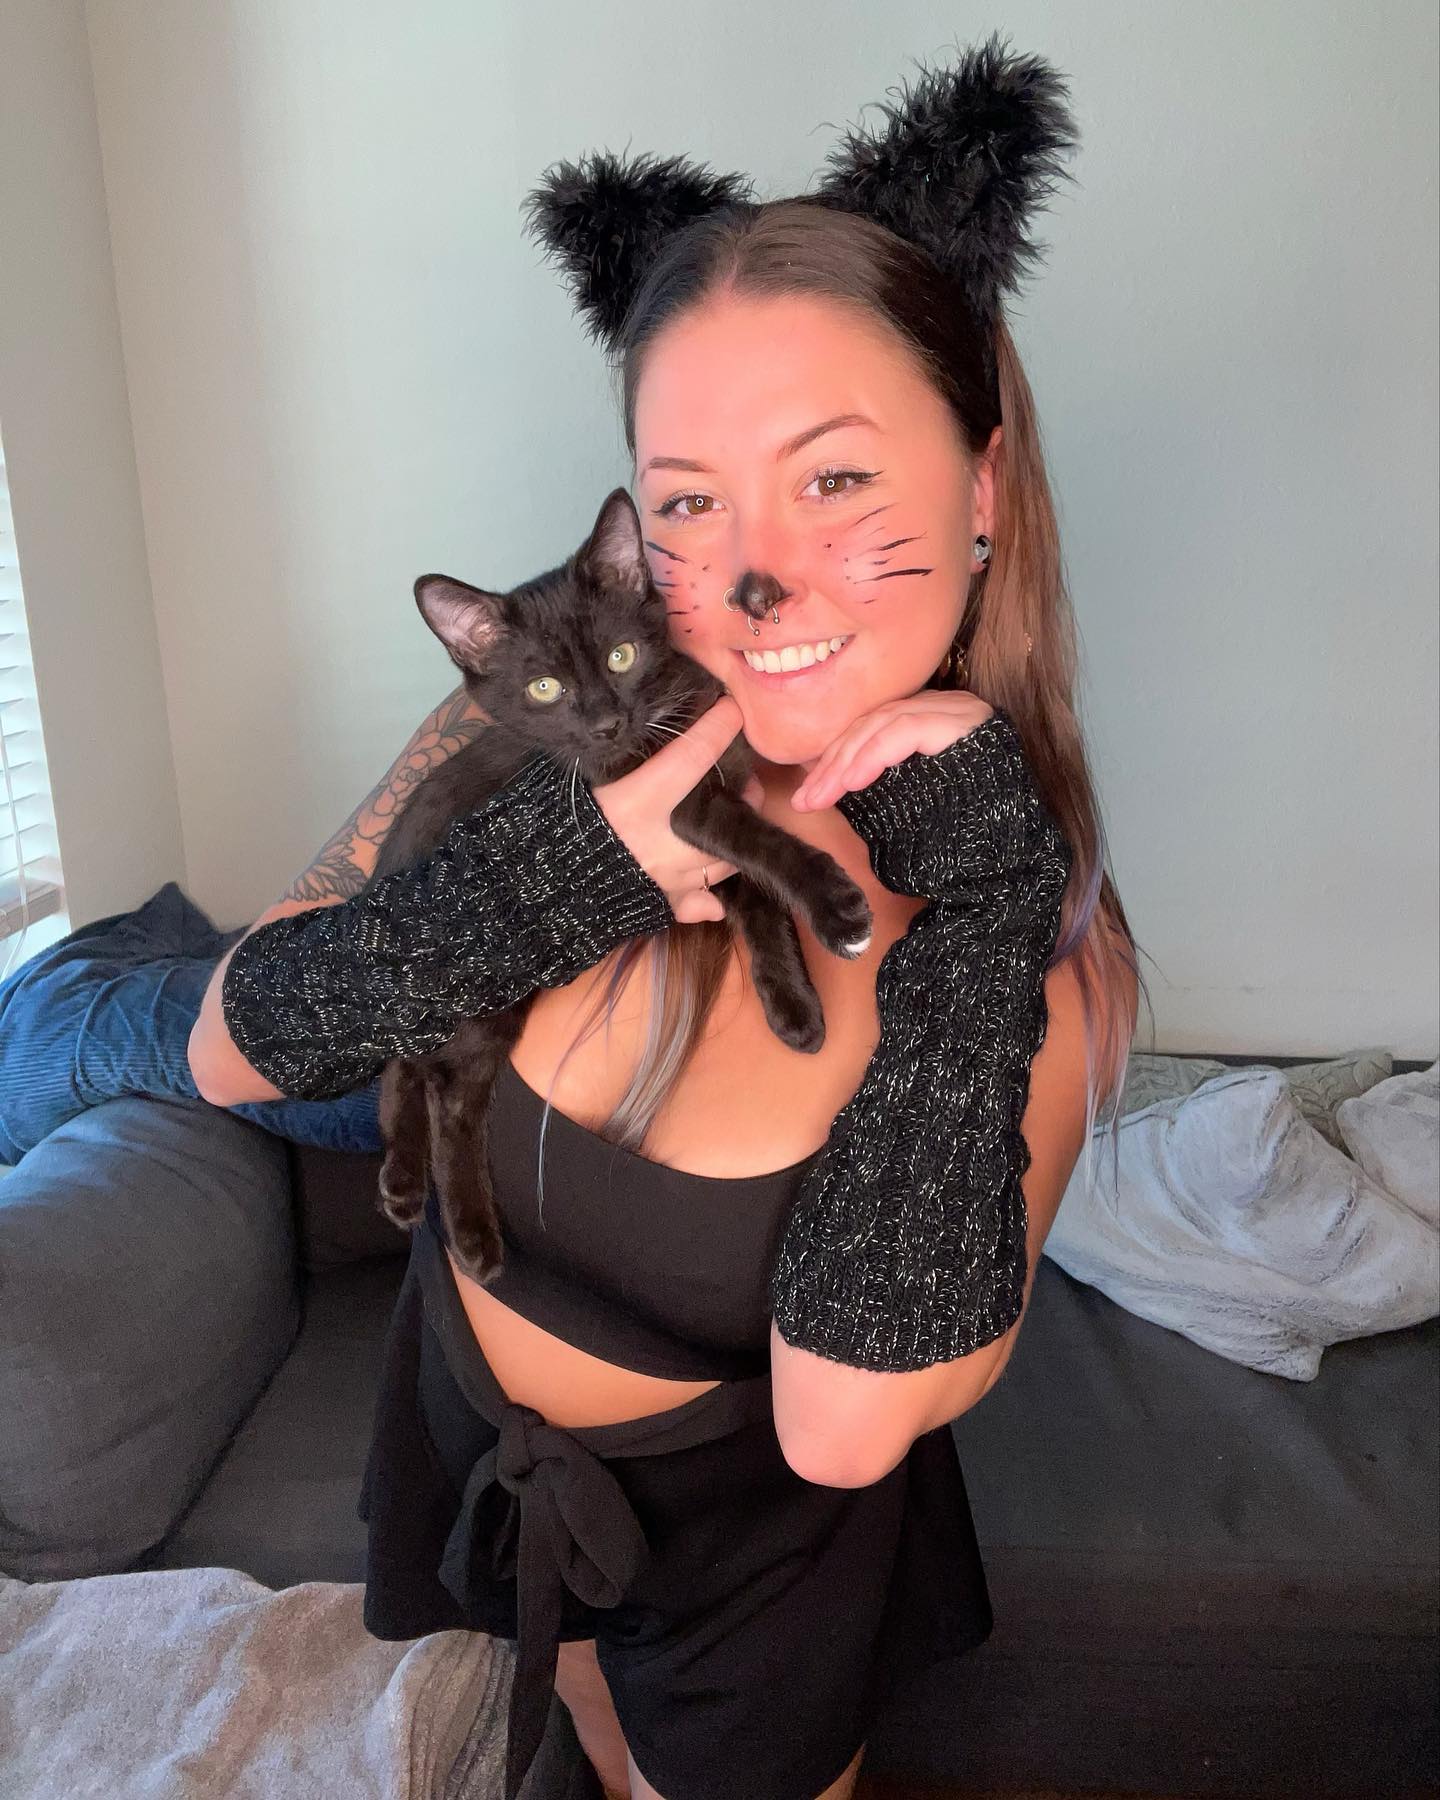 Happy Halloween from me and my newest Son, Salem! 🐈‍⬛🫶🏼 stay spooky!